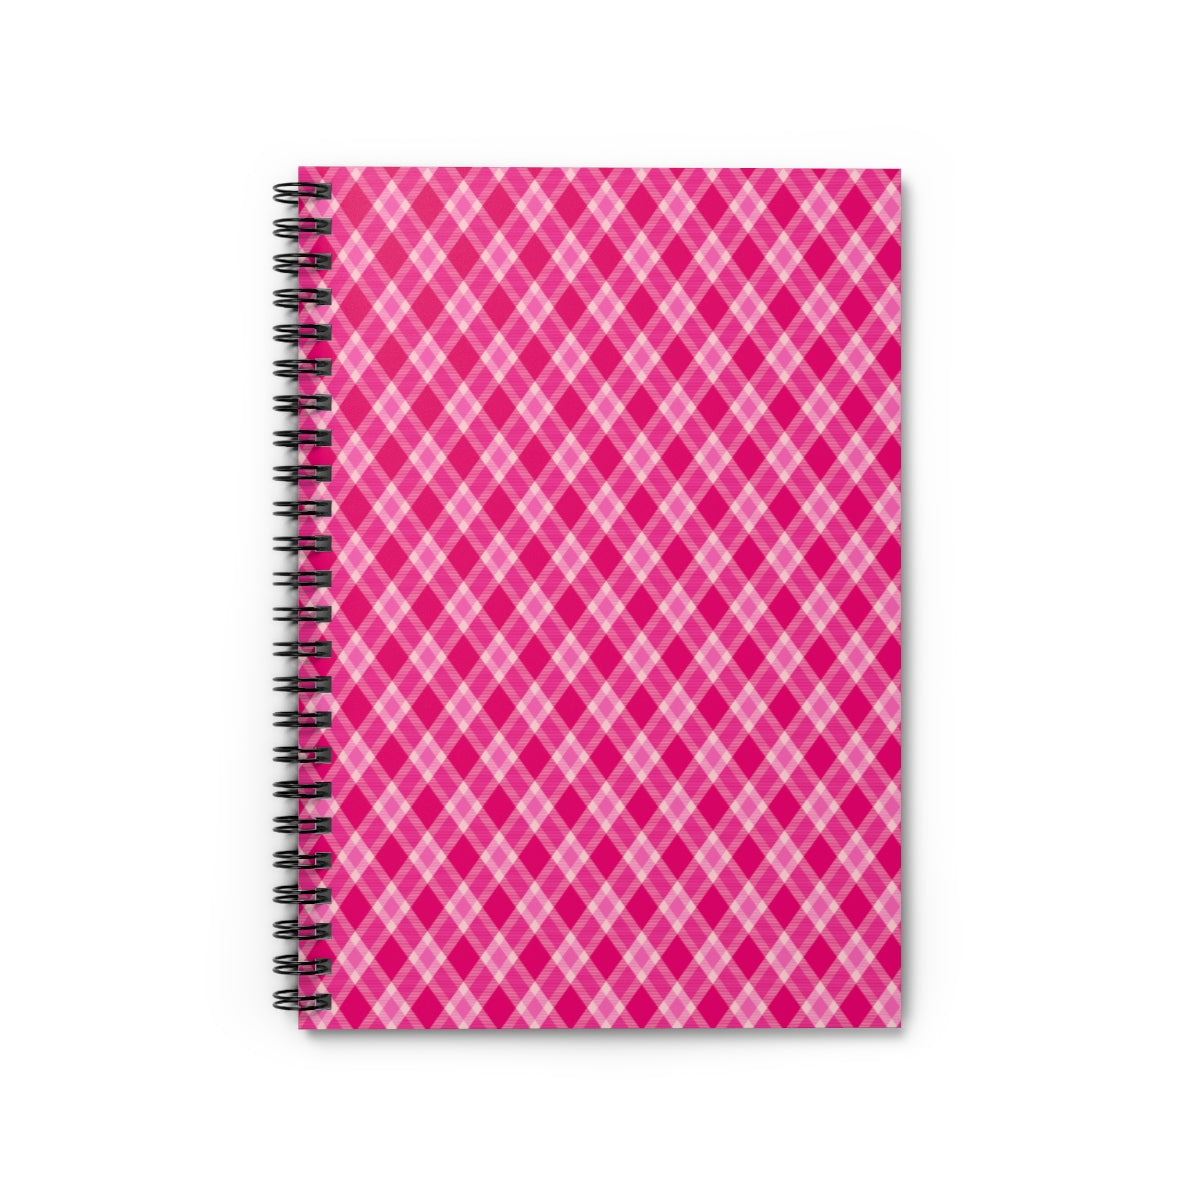 Pink Plaid Spiral Ruled Line Notebook